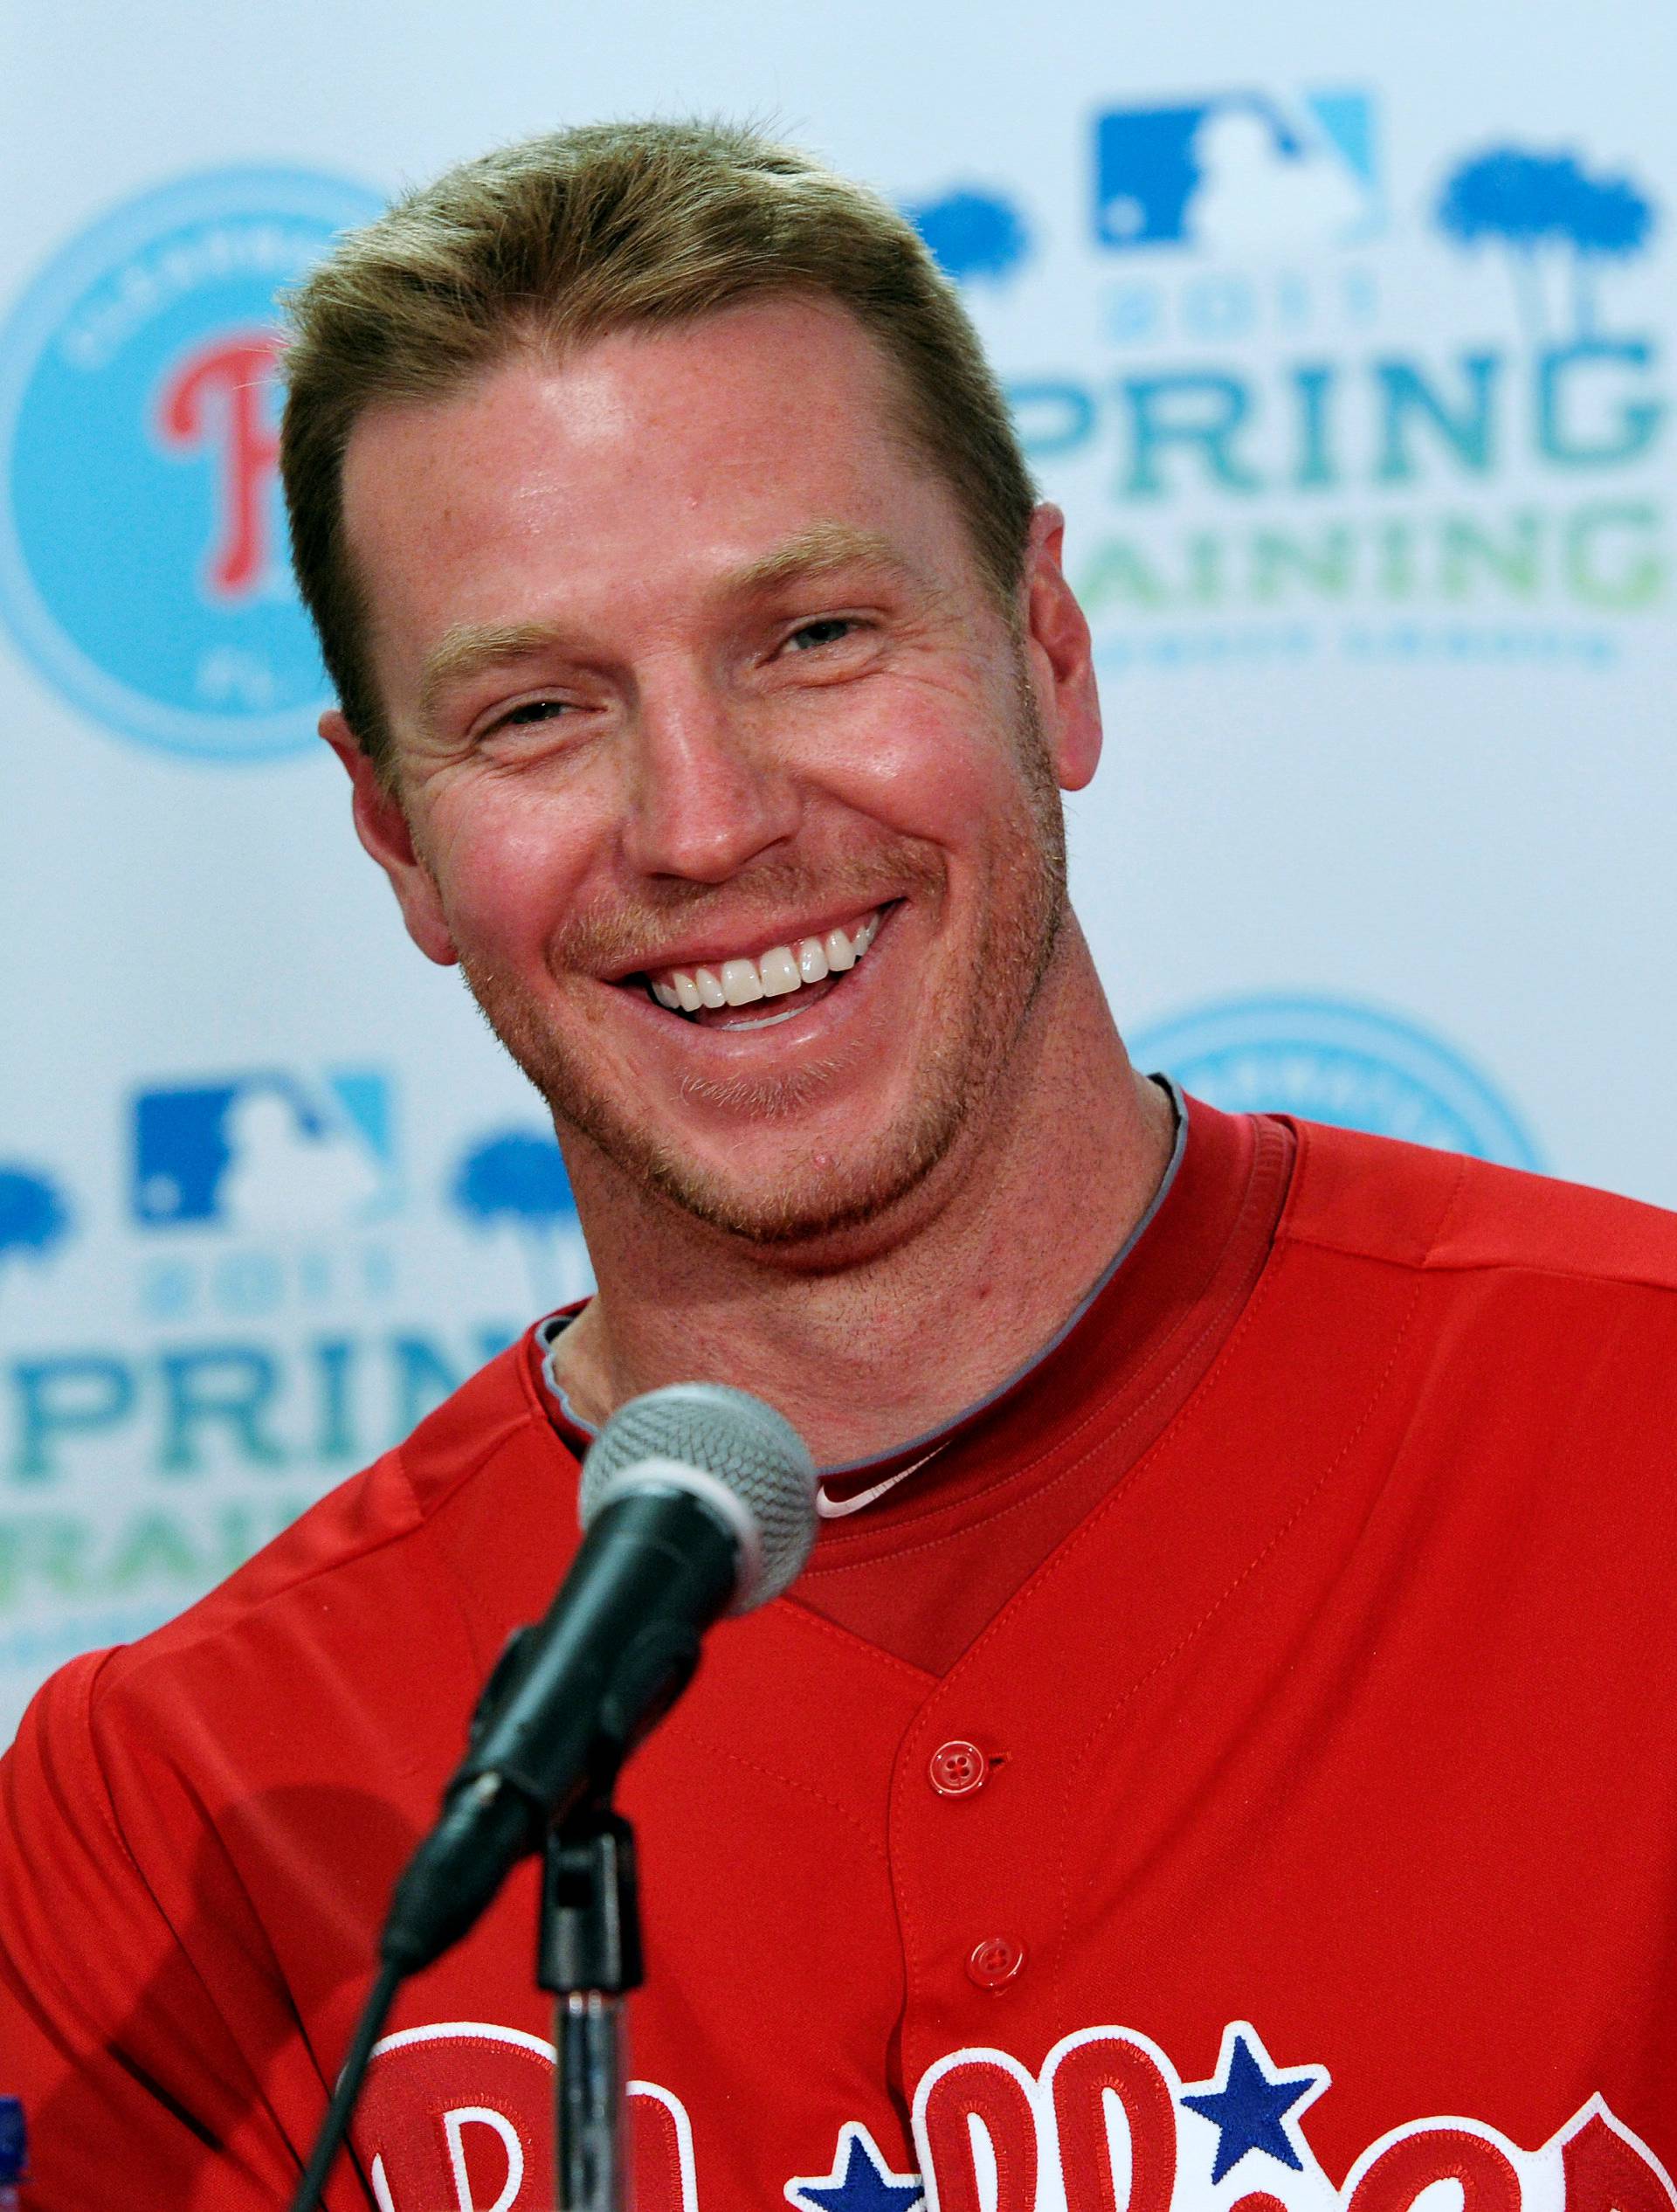 FILE PHOTO: Philadelphia Phillies starting pitcher Roy Halladay laughs during a news conference in Clearwater